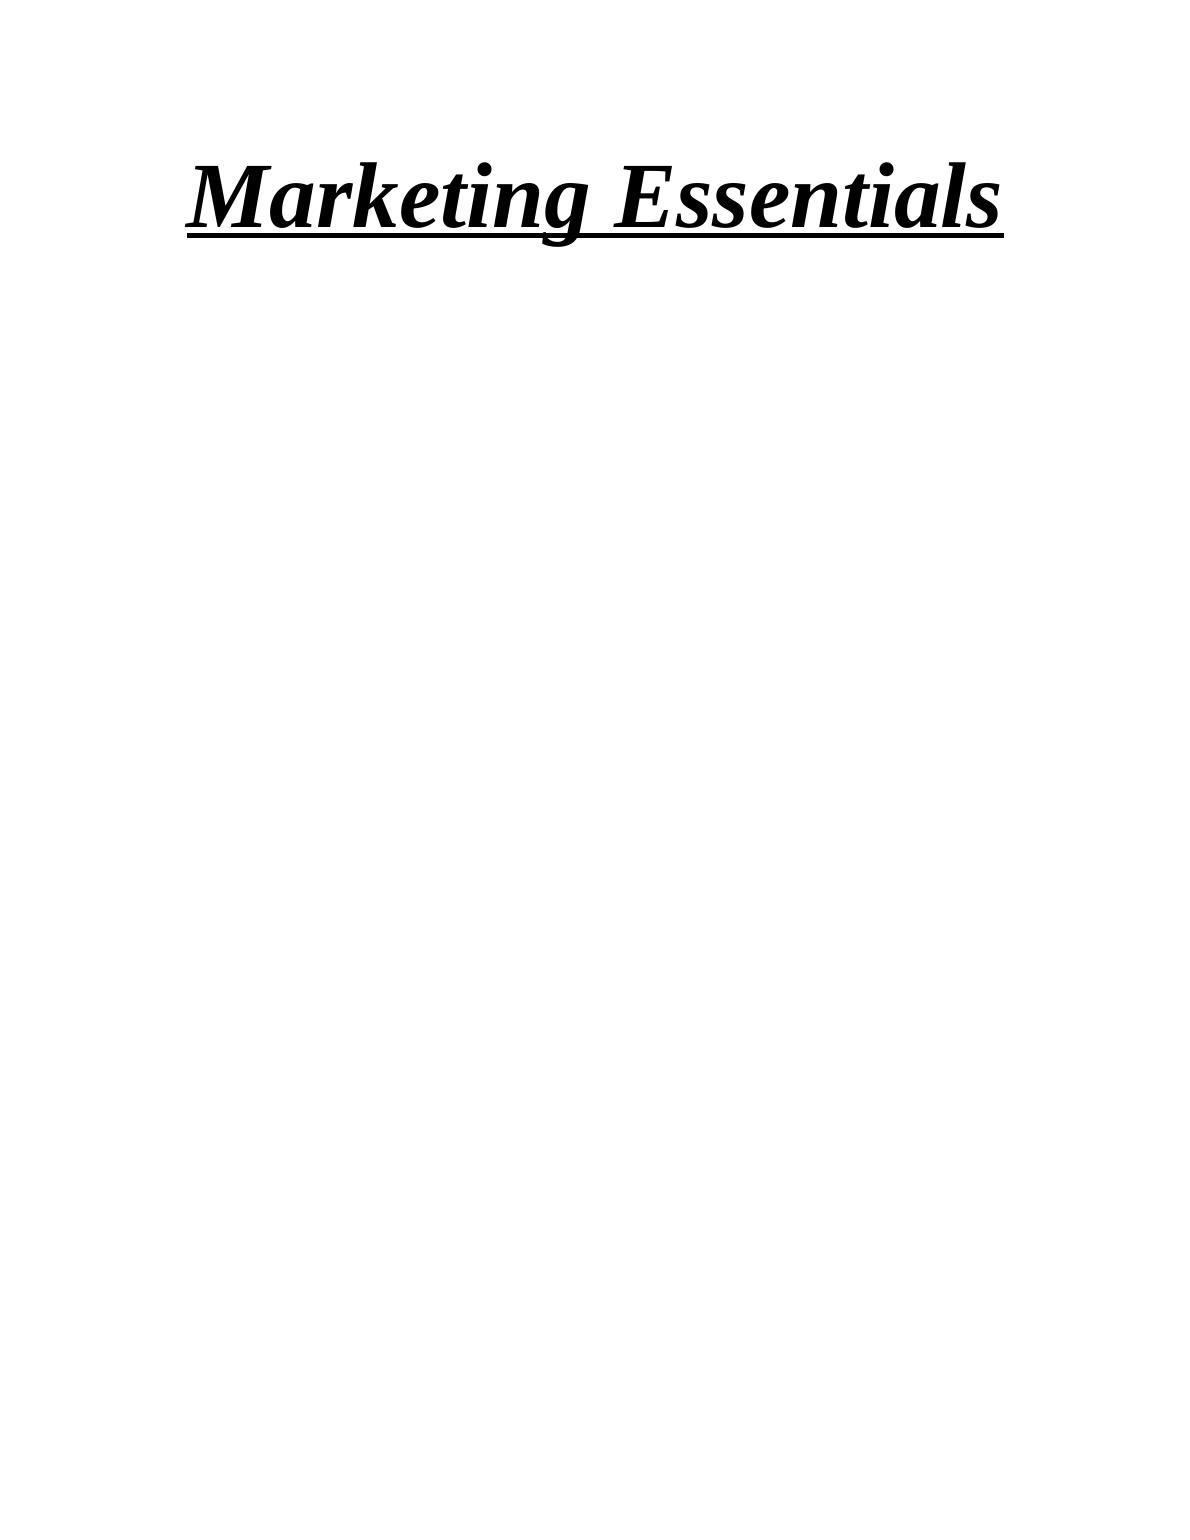 Roles and Responsibilities of Marketing Function in Tesco plc_1